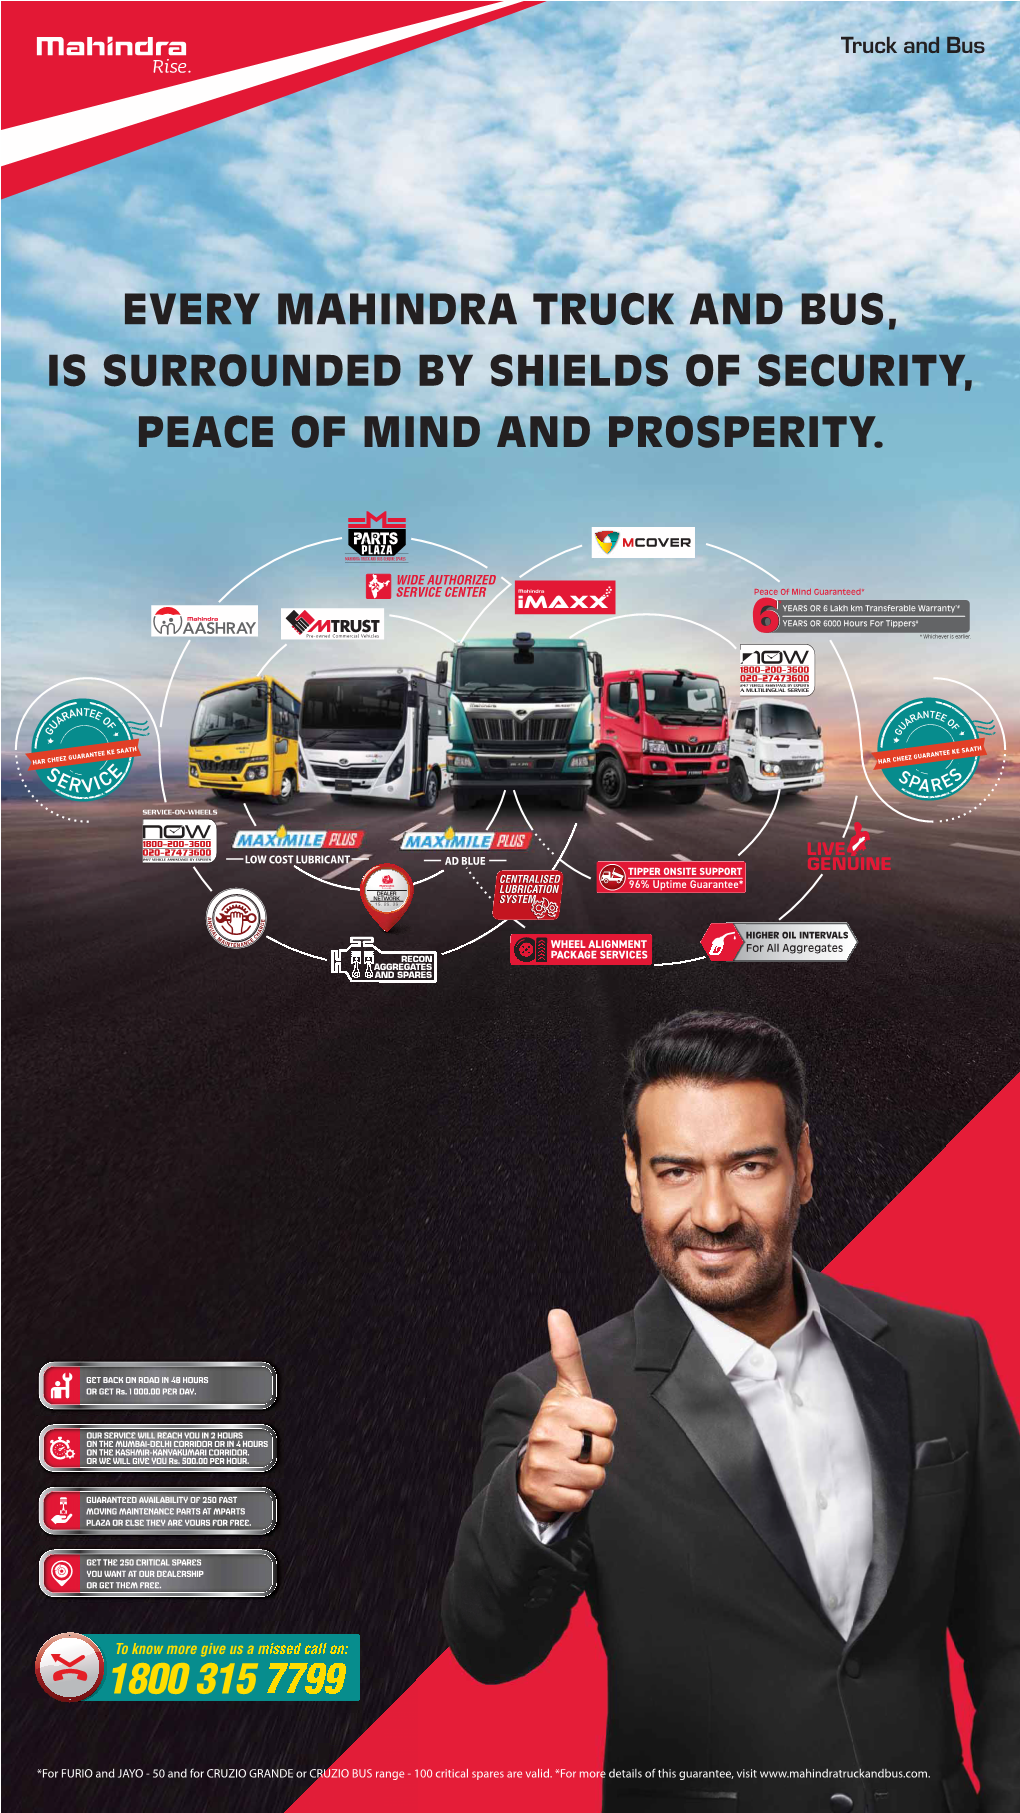 Every Mahindra Truck and Bus, Is Surrounded by Shields of Security, Peace of Mind and Prosperity